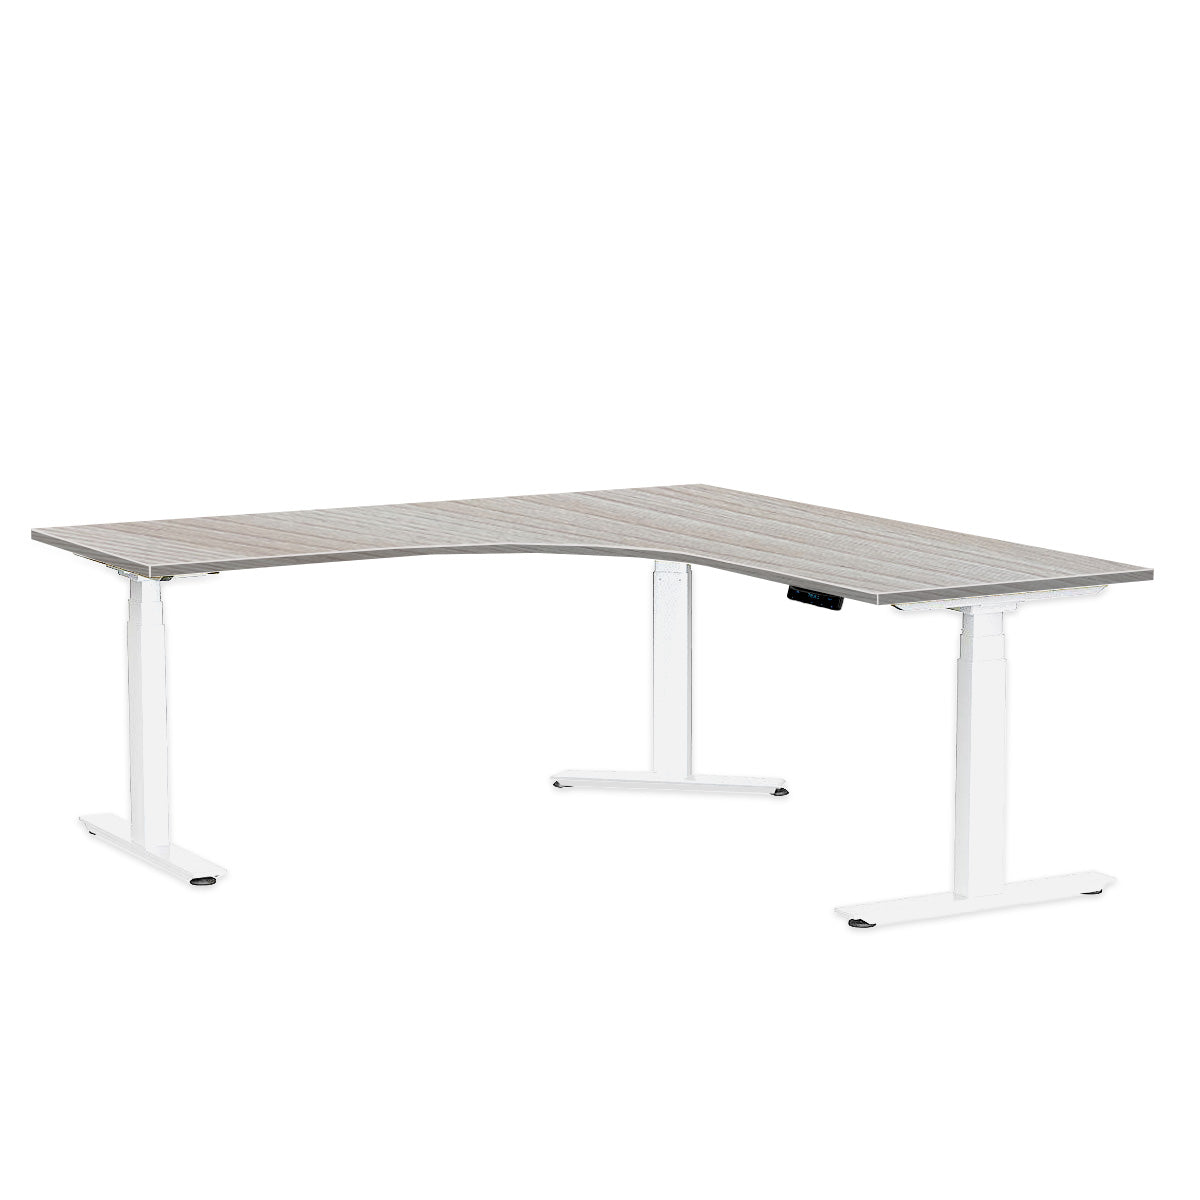 L-Shaped Extended Signature Standing Desk, (Customized) MFC Tabletop